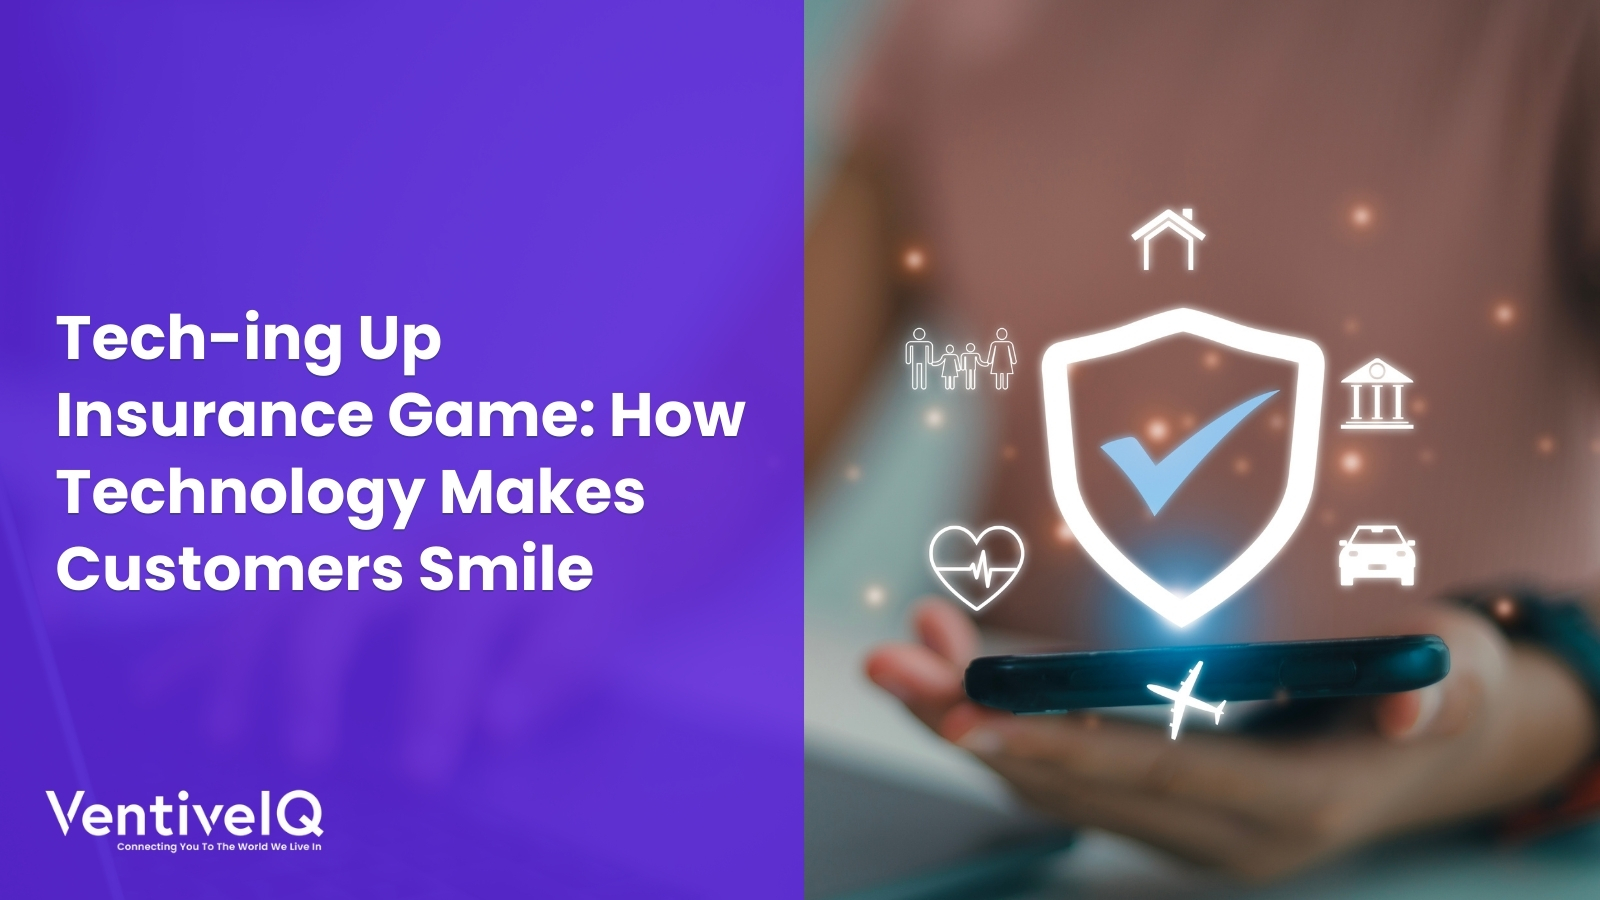 Tech-ing Up Insurance Game: How Technology Makes Customers Smile